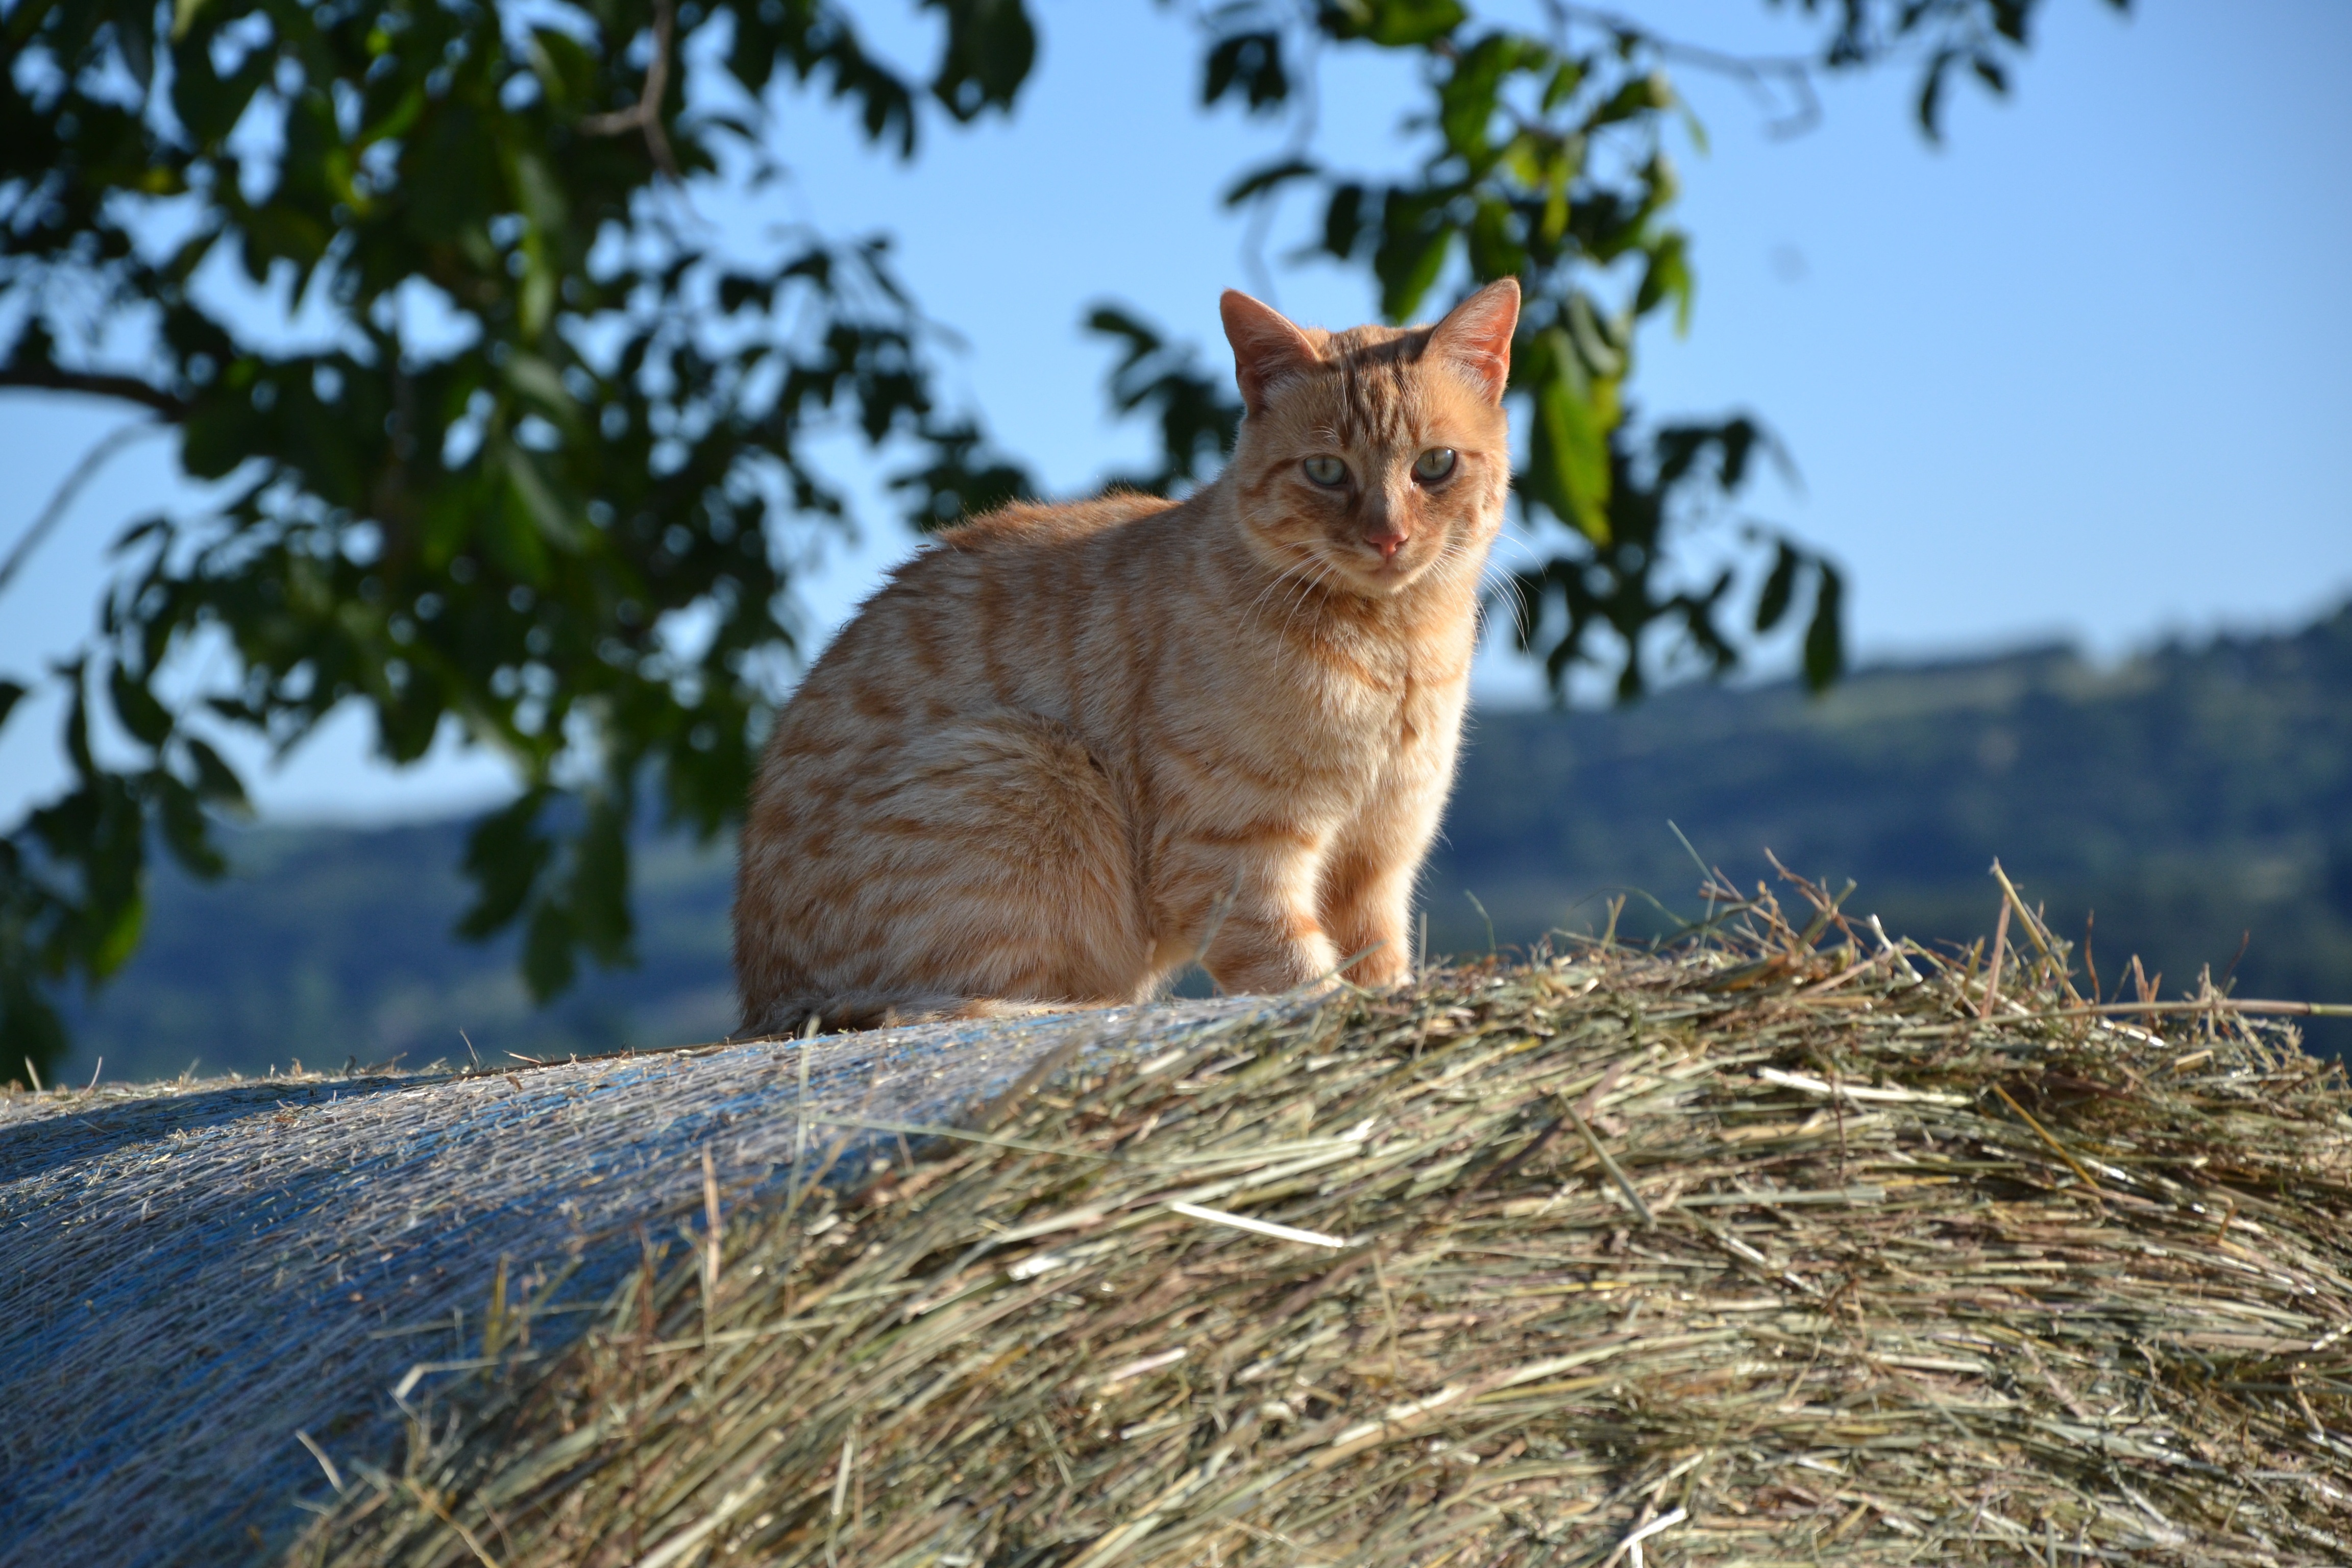 A ginger cat sitting on a bale of hay by glucosala